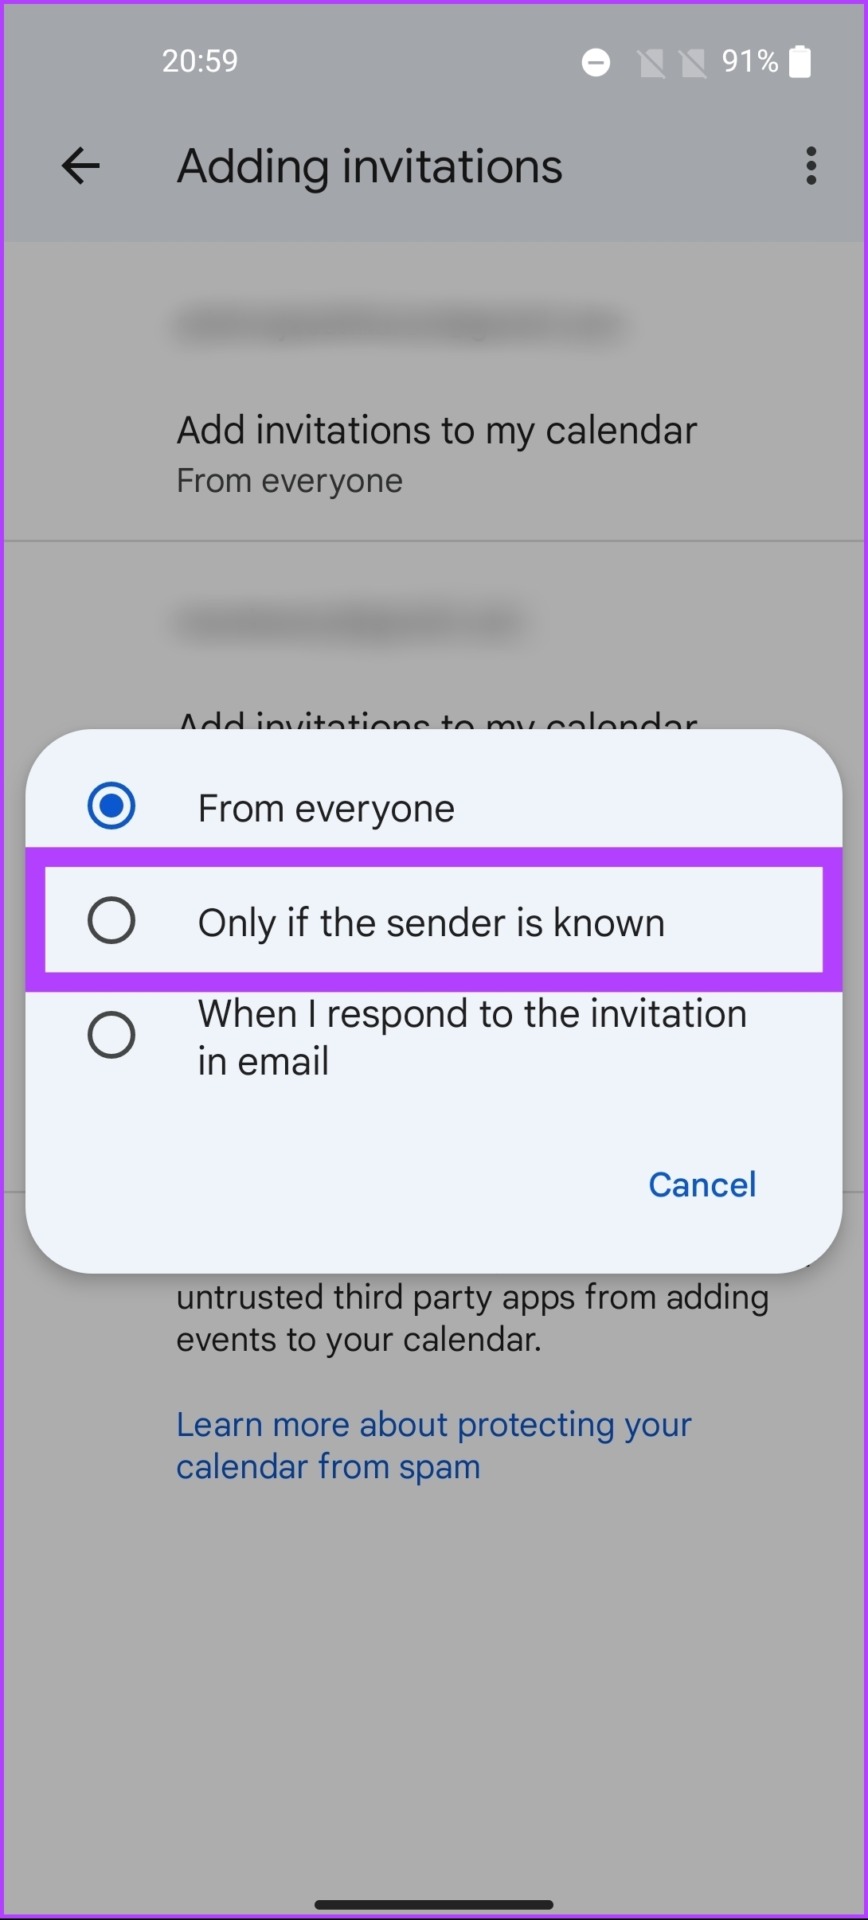 choose between the 'From everyone,' 'Only if the sender is known,' or 'When I respond to the invitation in email' option. 